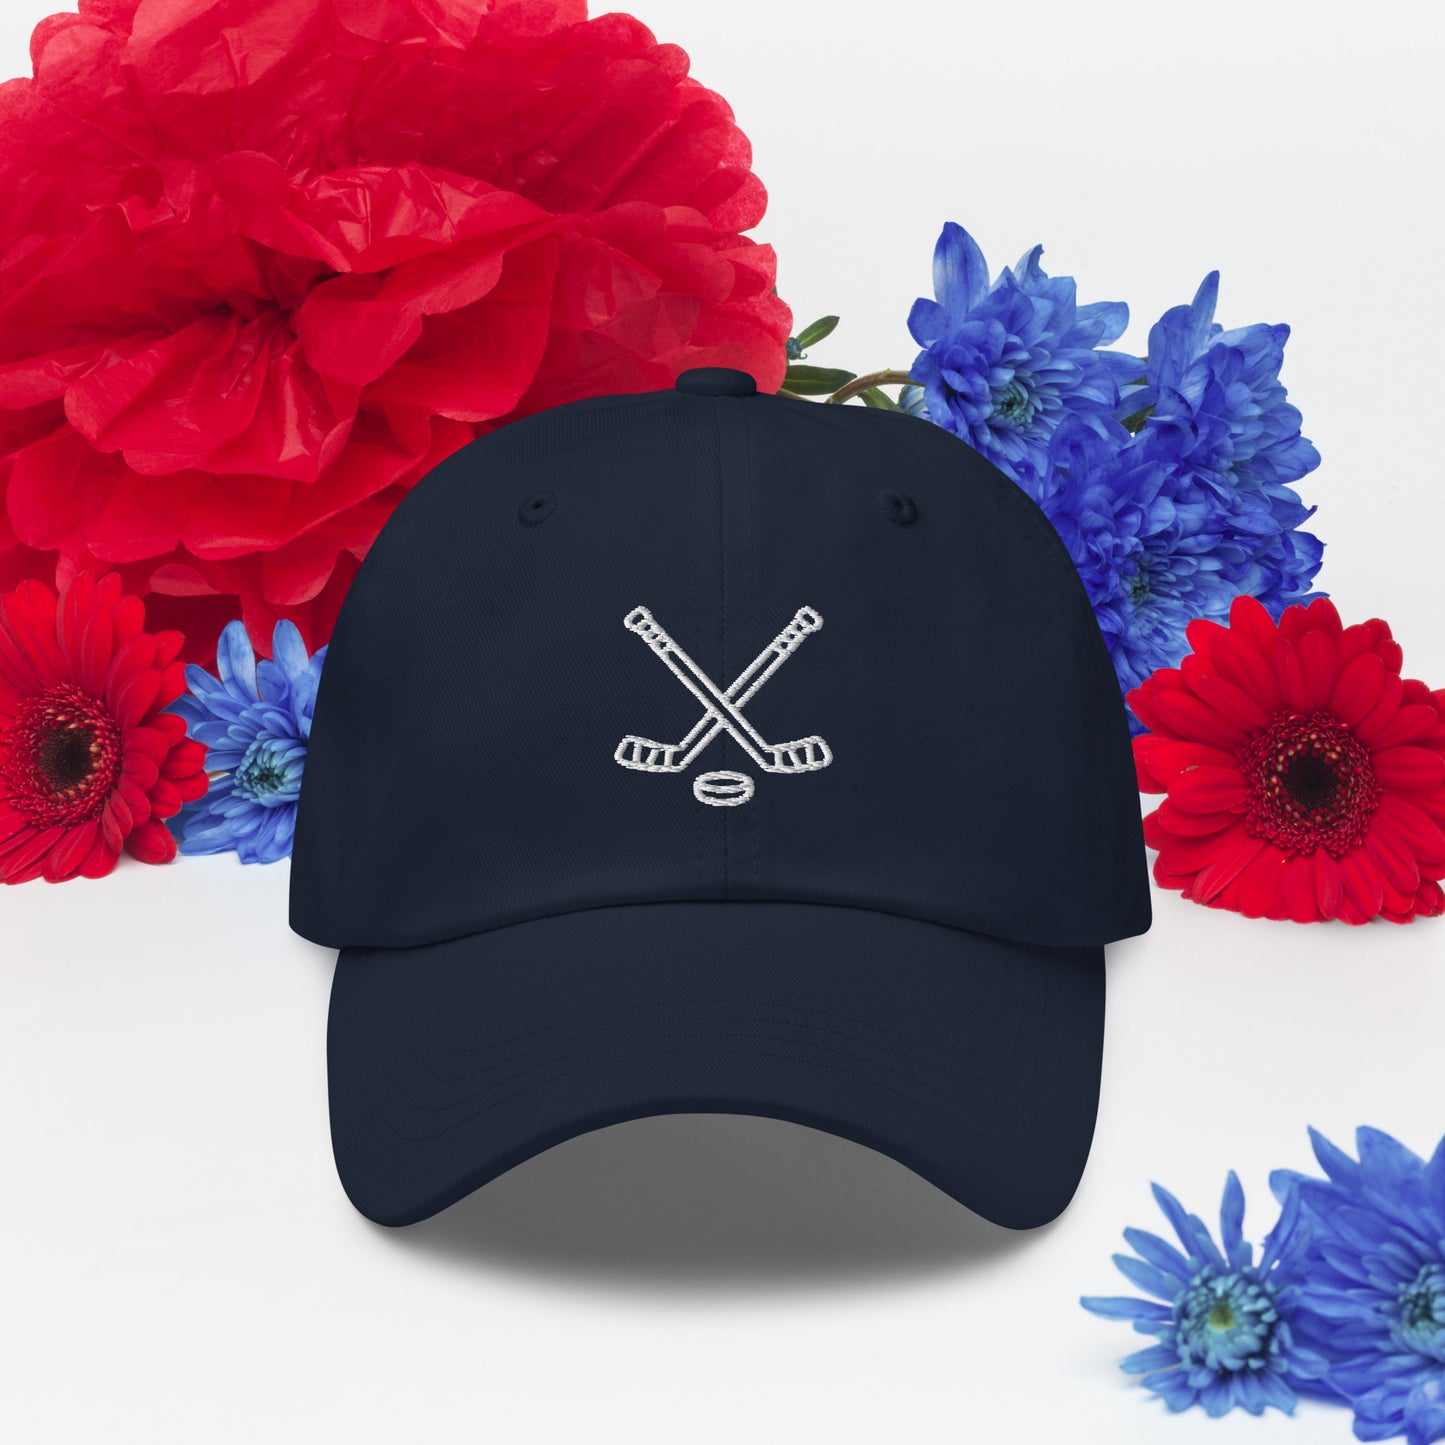 Navy hat with print of hockeysticks and puk